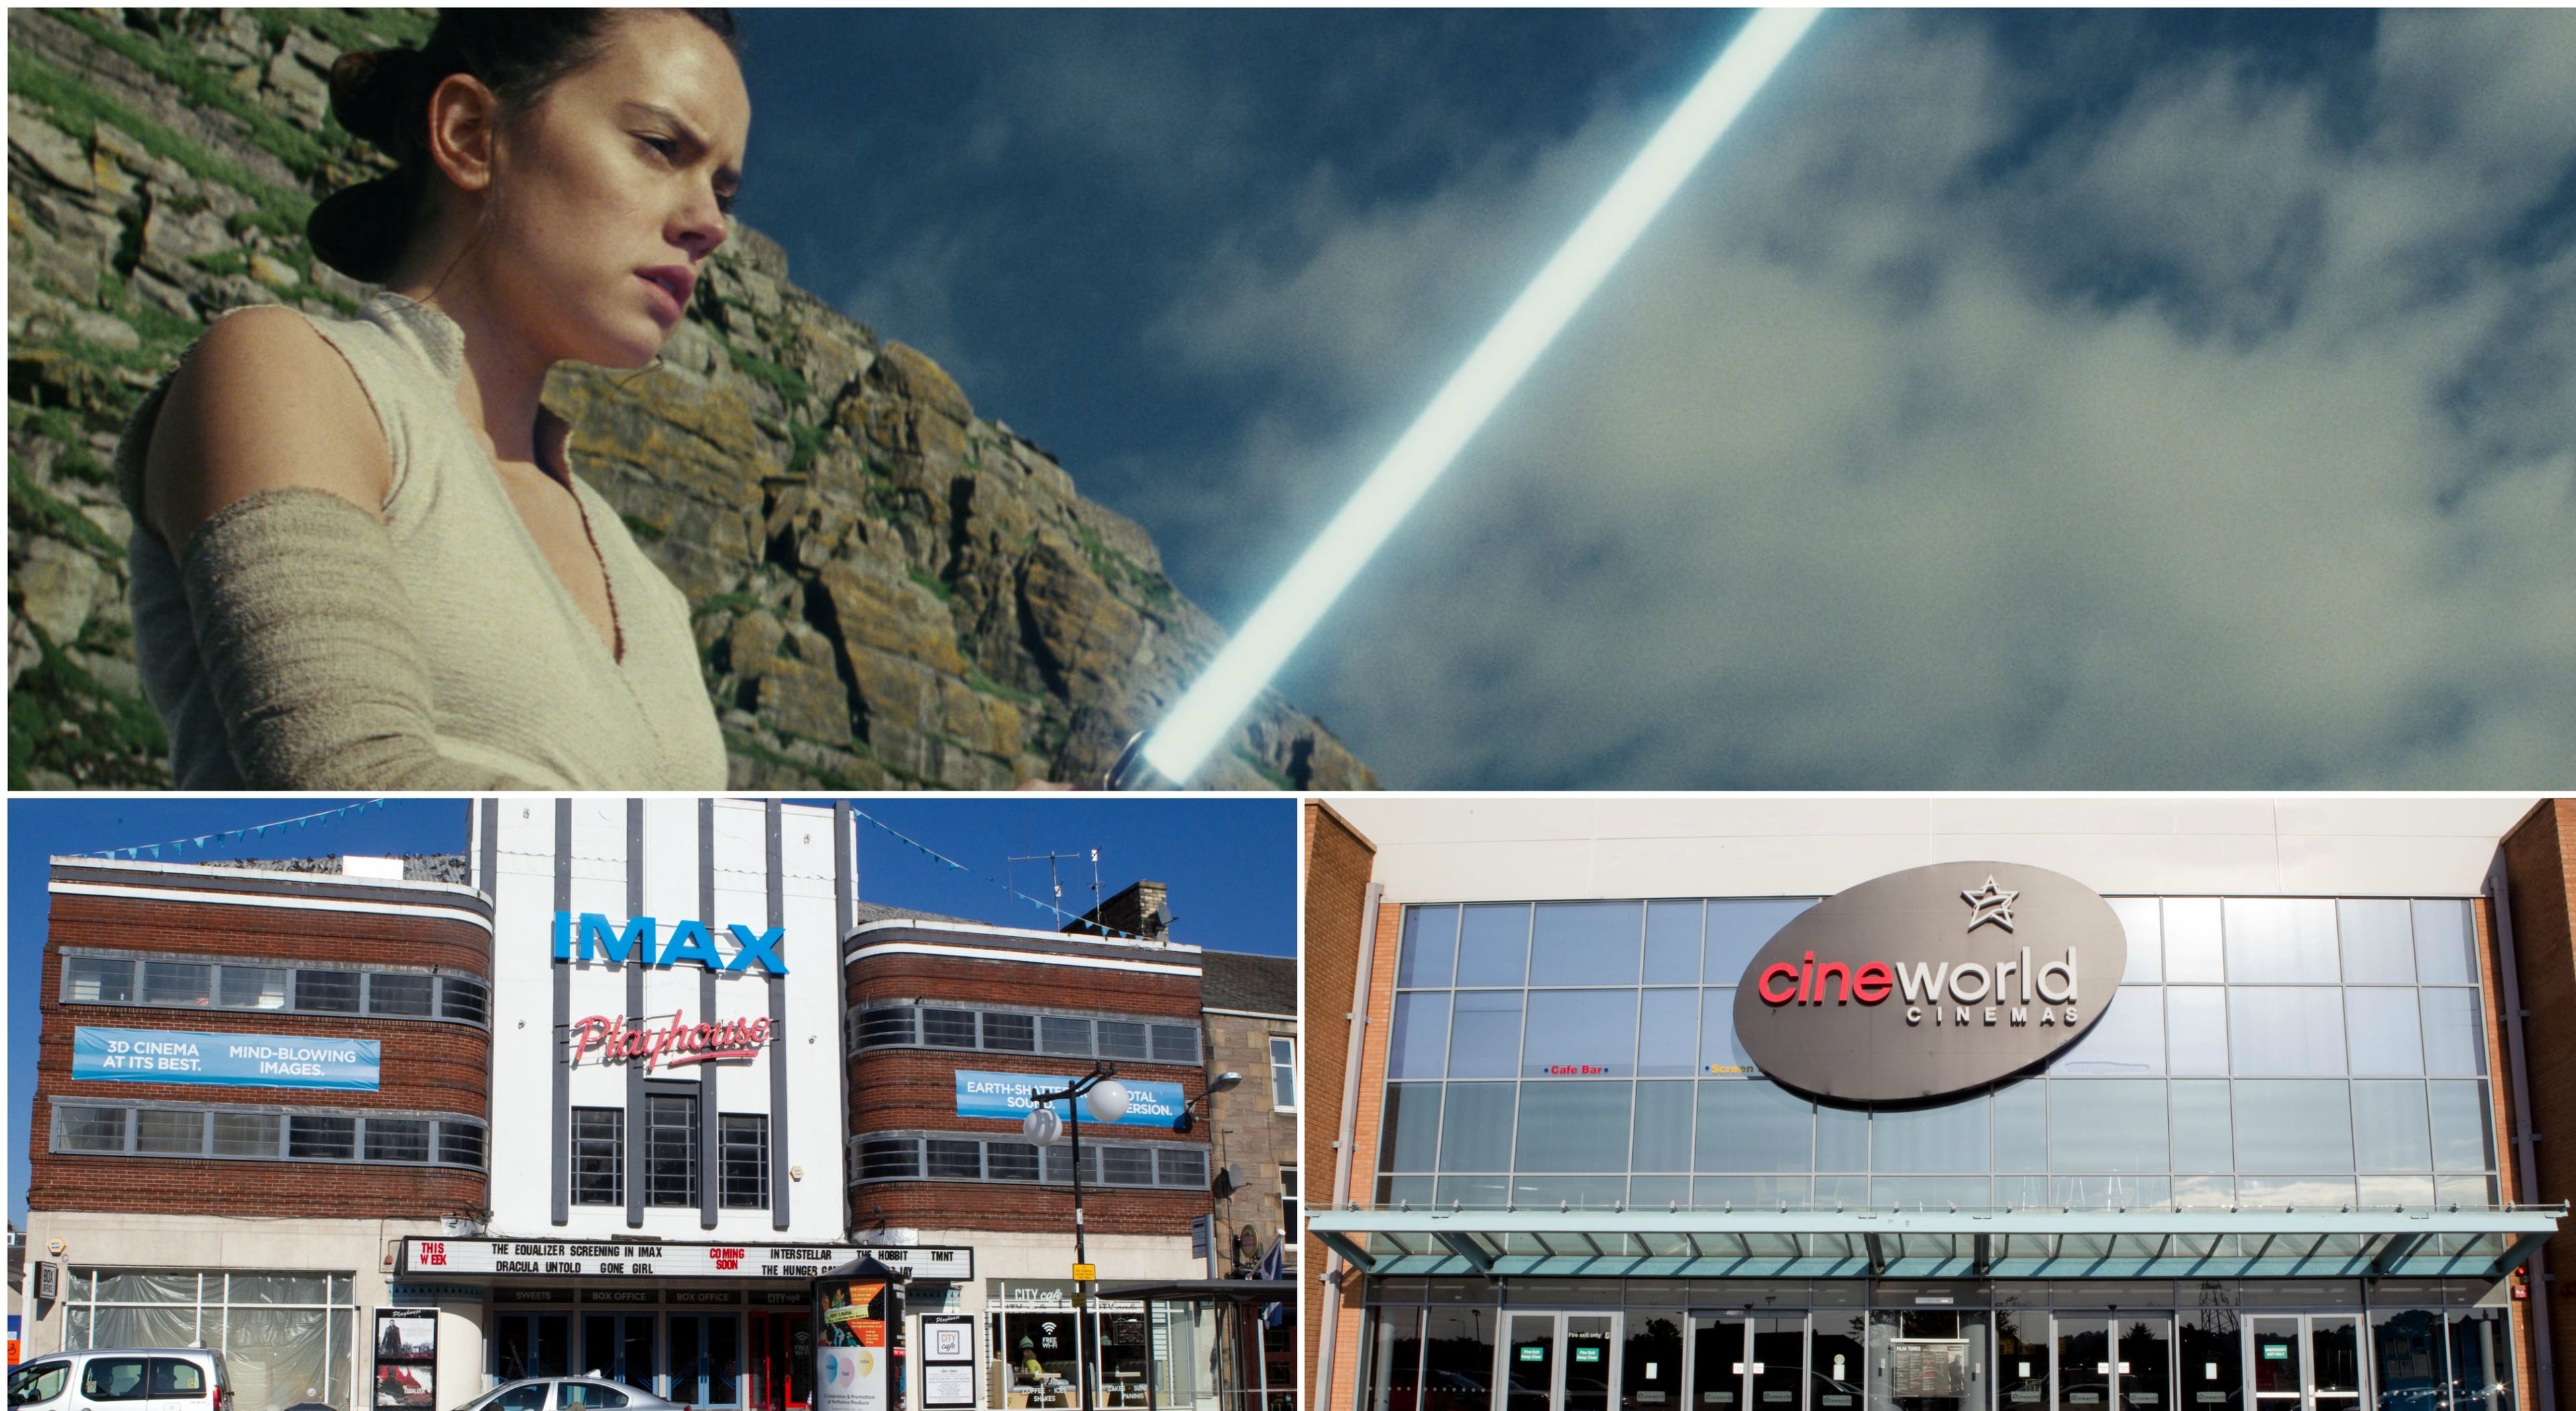 Star Wars: The Last Jedi is coming to screens across Tayside and Fife on Thursday.